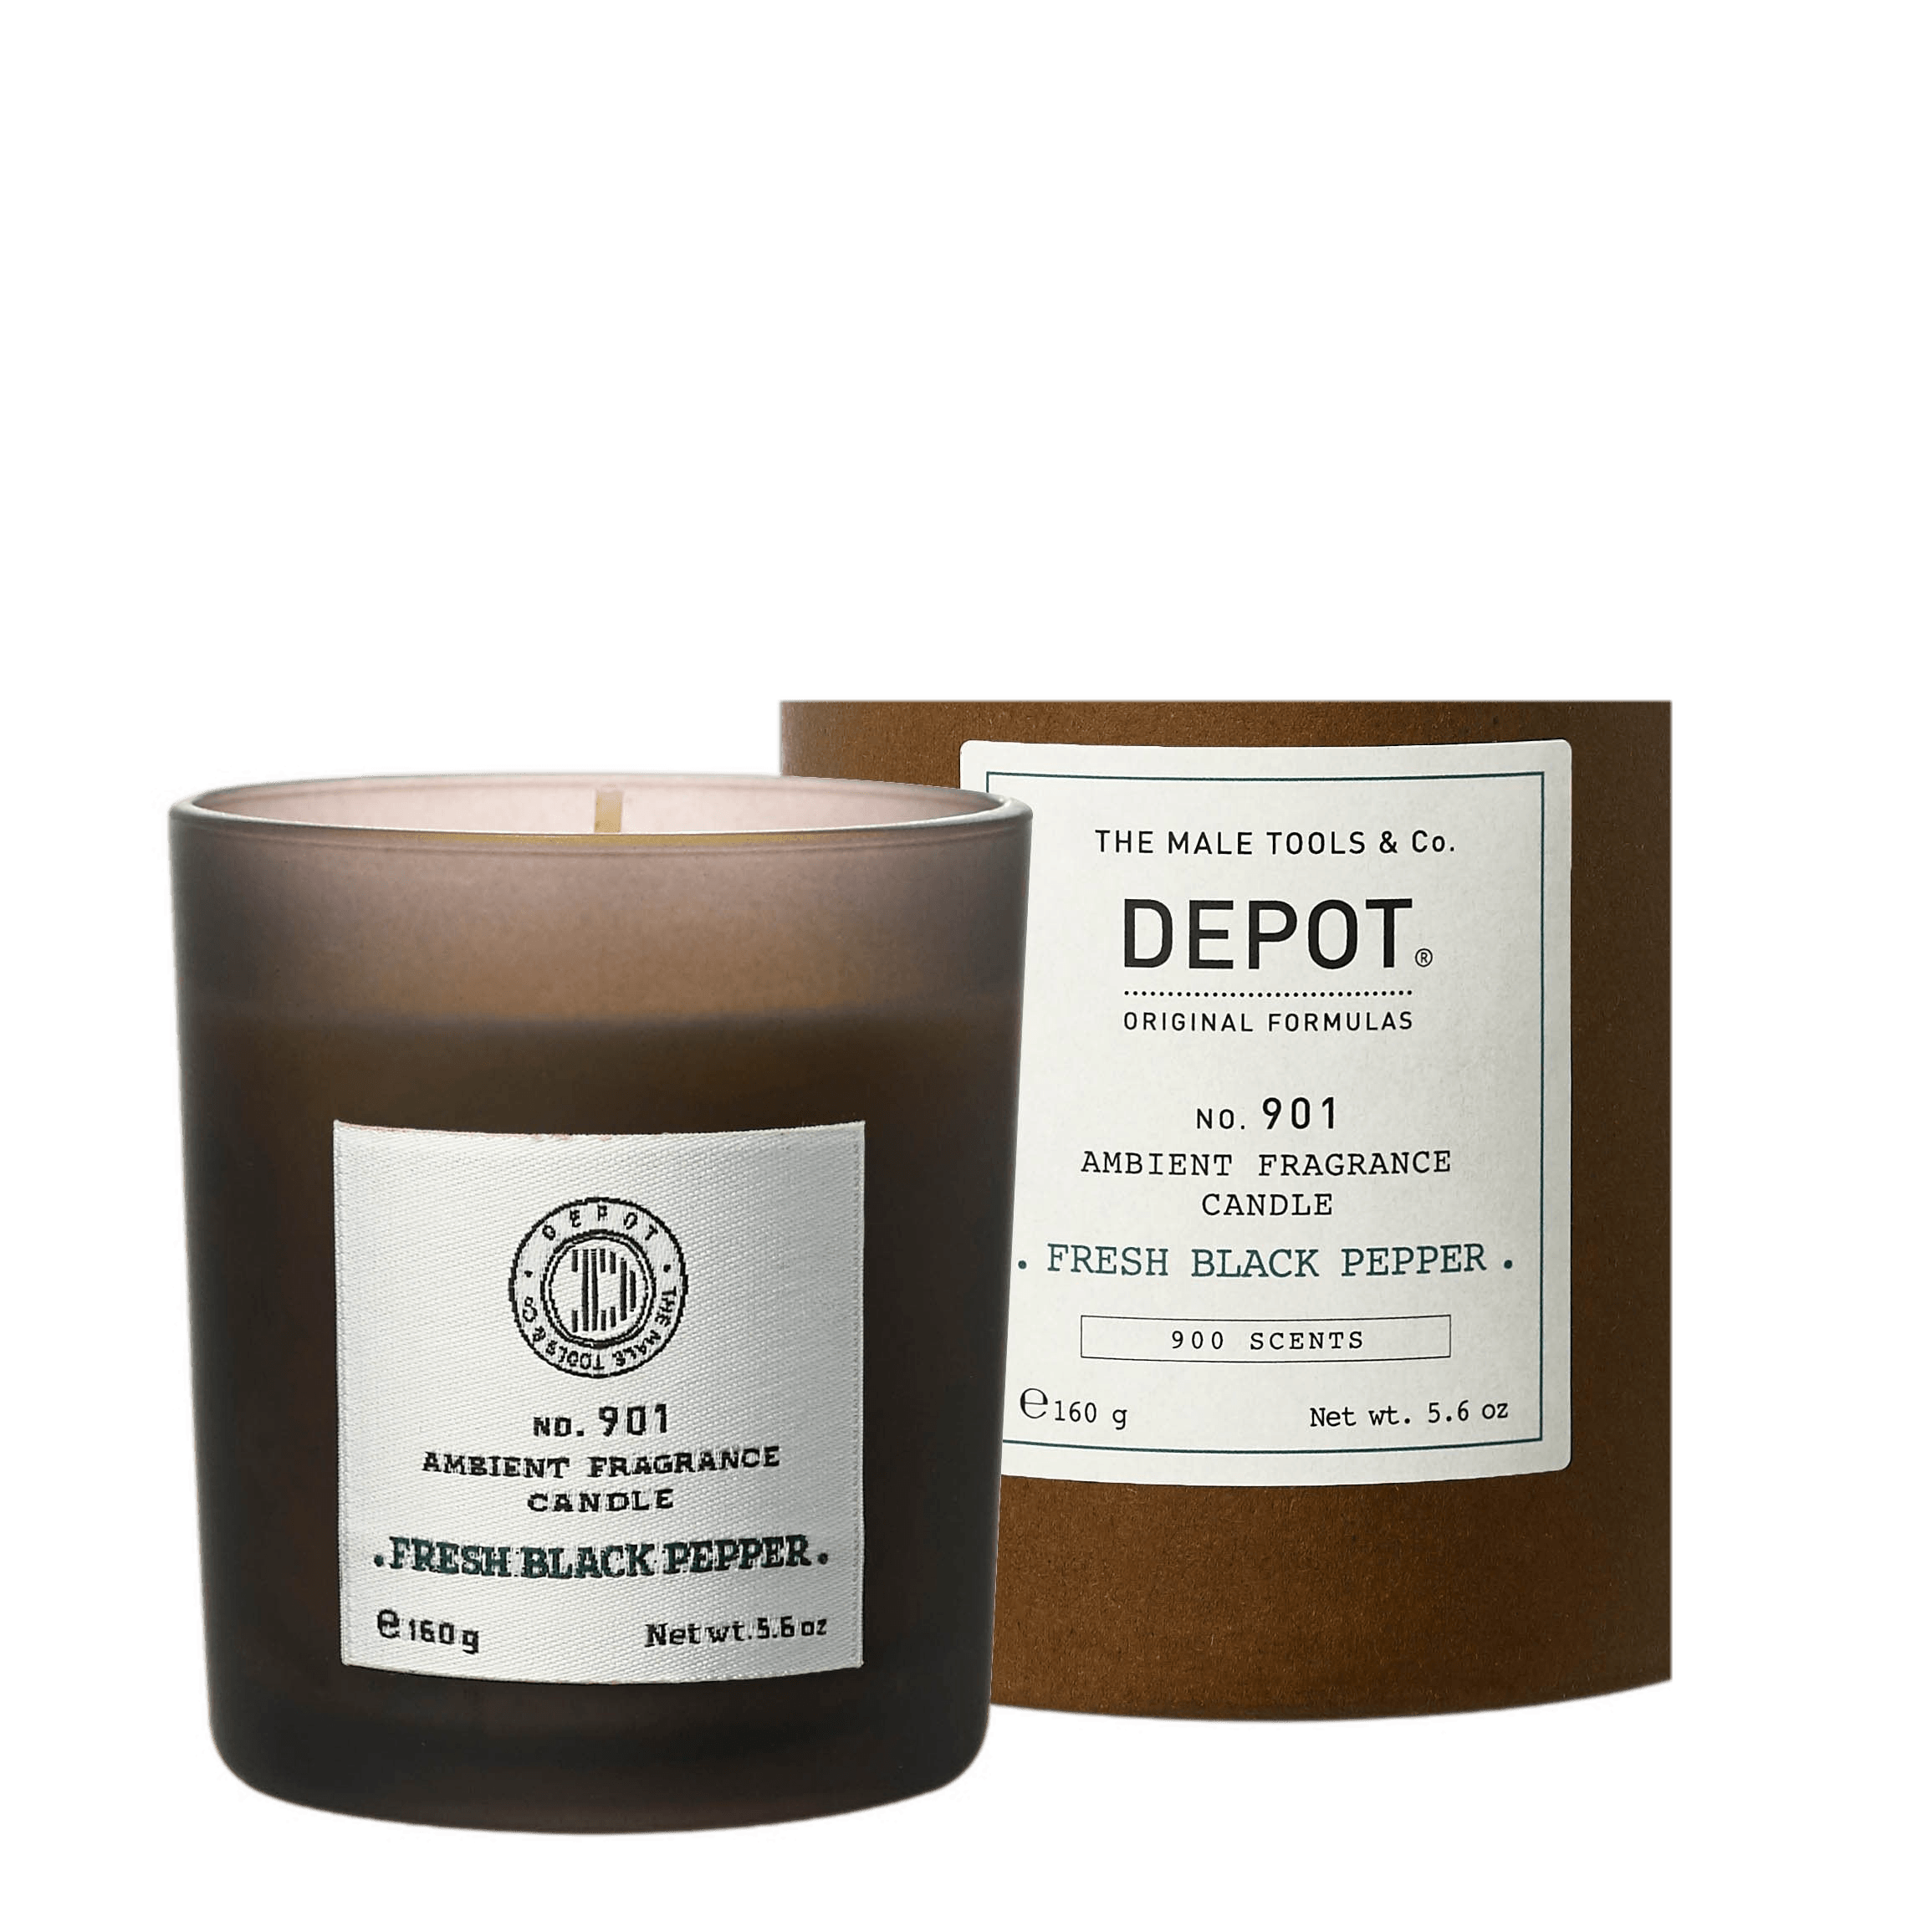 Depot No. 901 Ambient Fragrance Candle Fresh Black Pepper